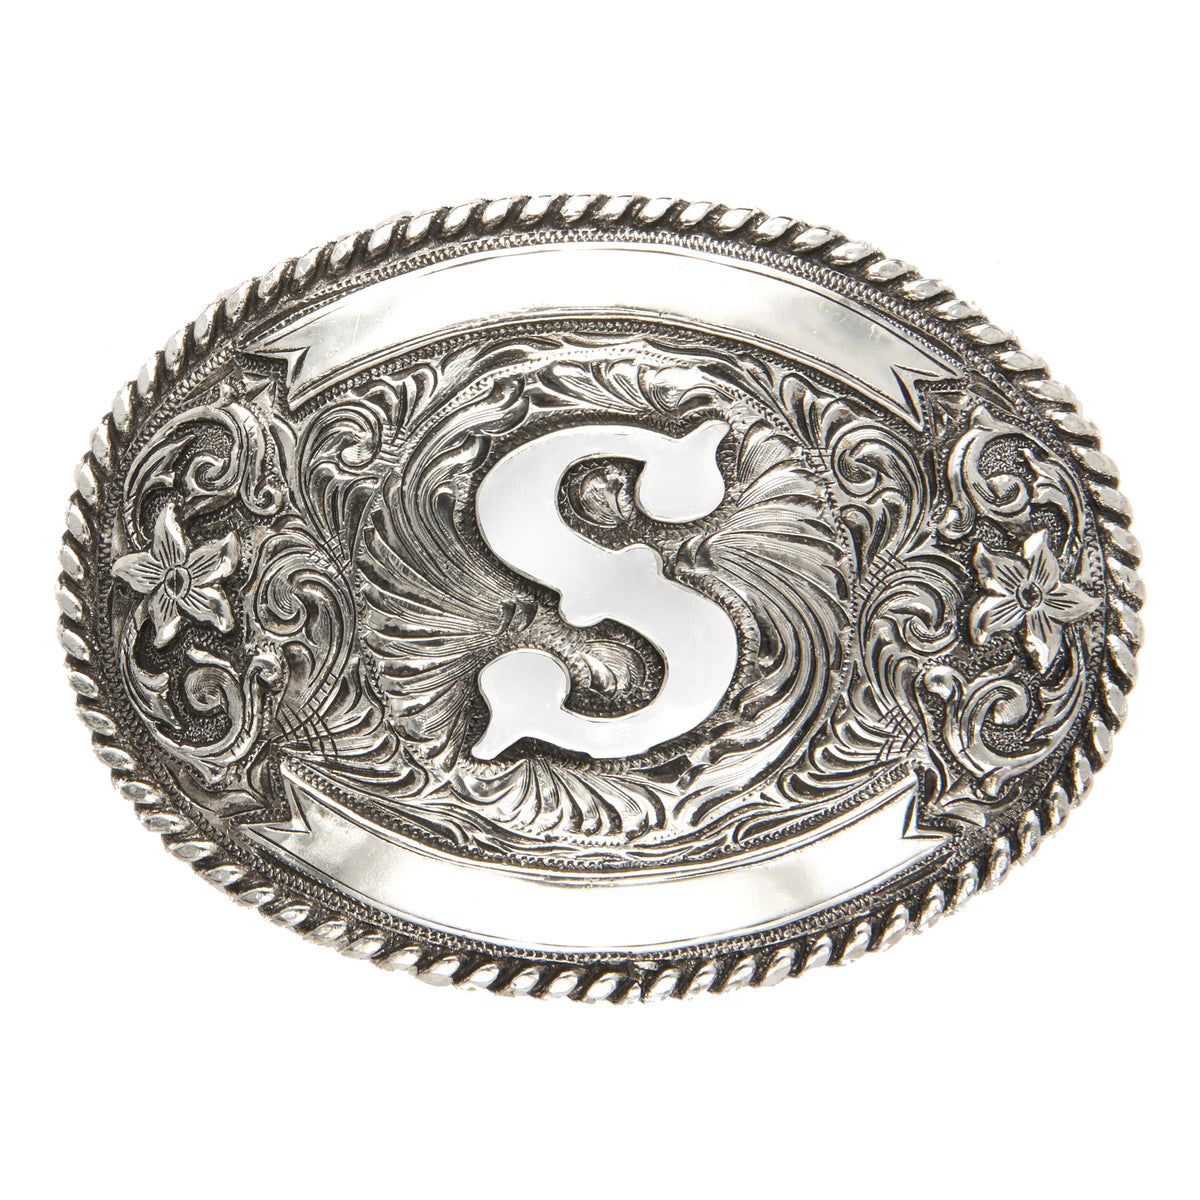 Initial “S” Buckle